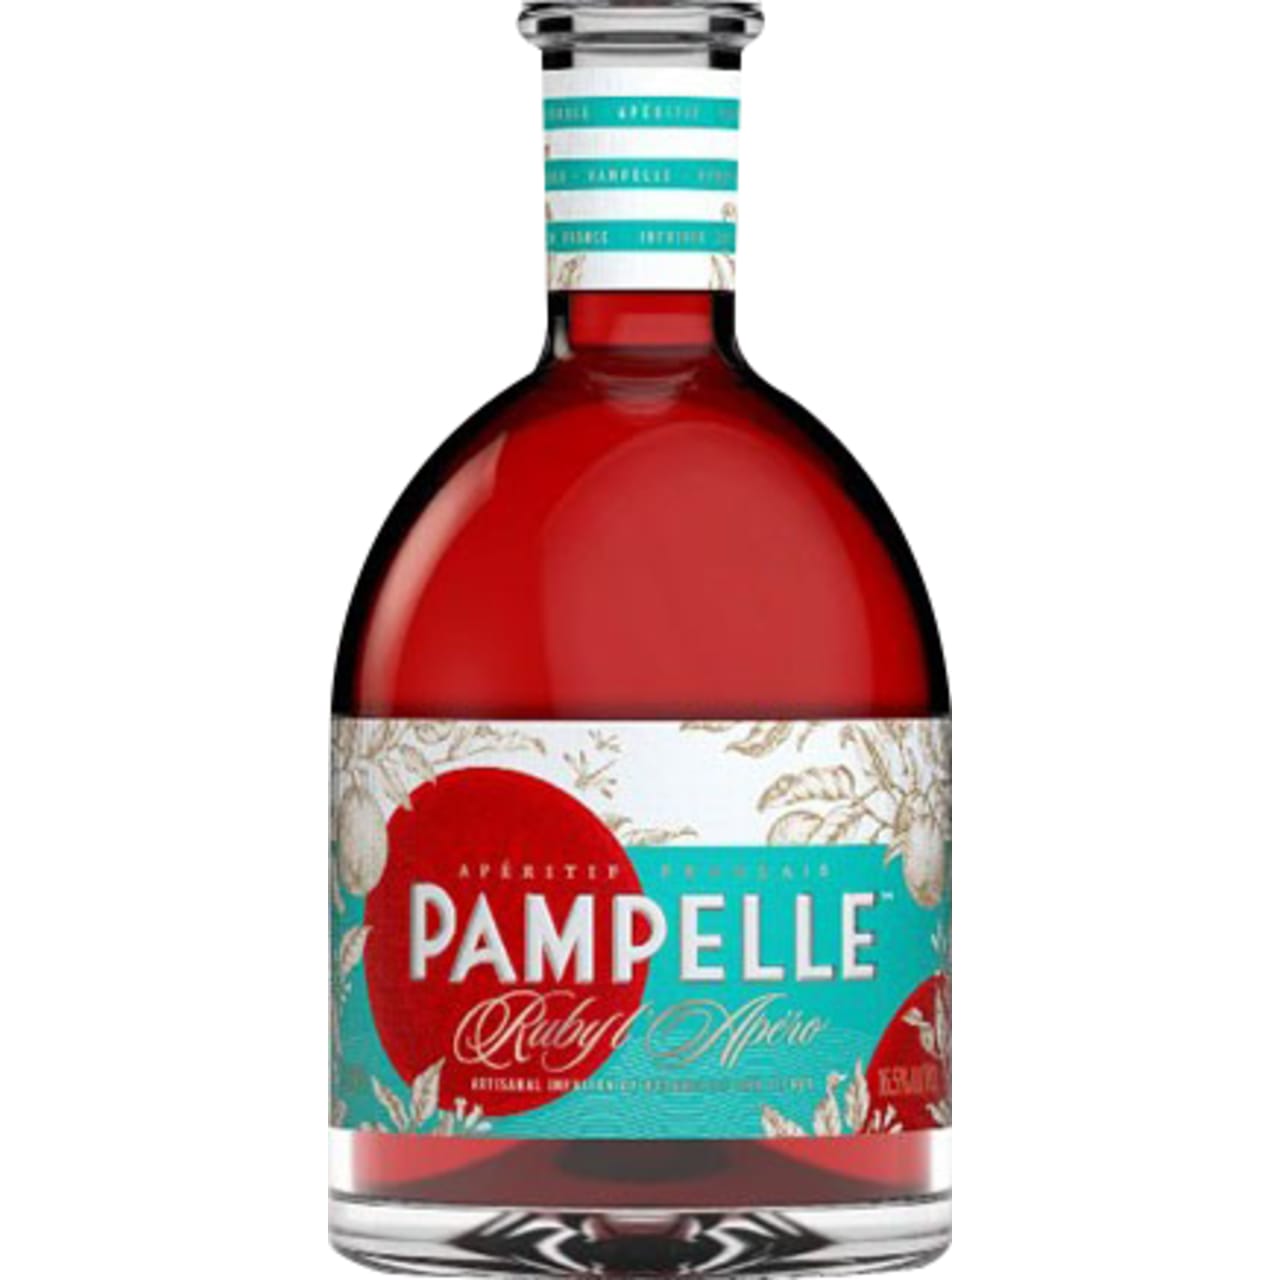 Pampelle Ruby L'Apero is made from the infusion of citrus peels, natural botanicals and Eau de Vie but is brought to life by a key ingredient which is ruby red grapefruits from the Mediterranean island of Corsica.